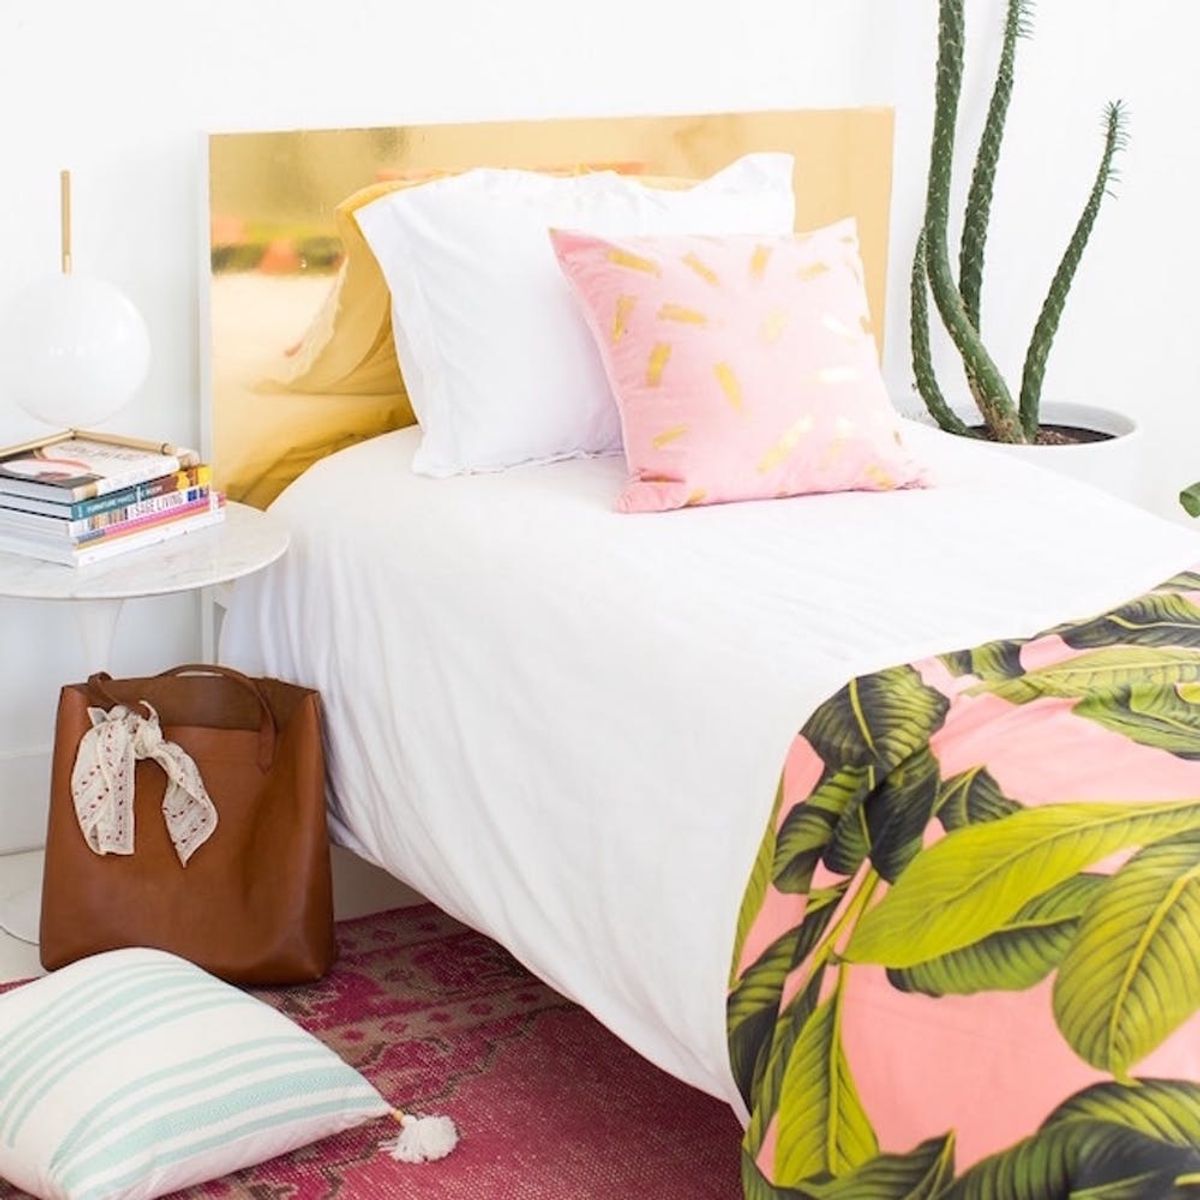 What to Make This Weekend: Brass Headboard, Graphic Laundry Baskets + More